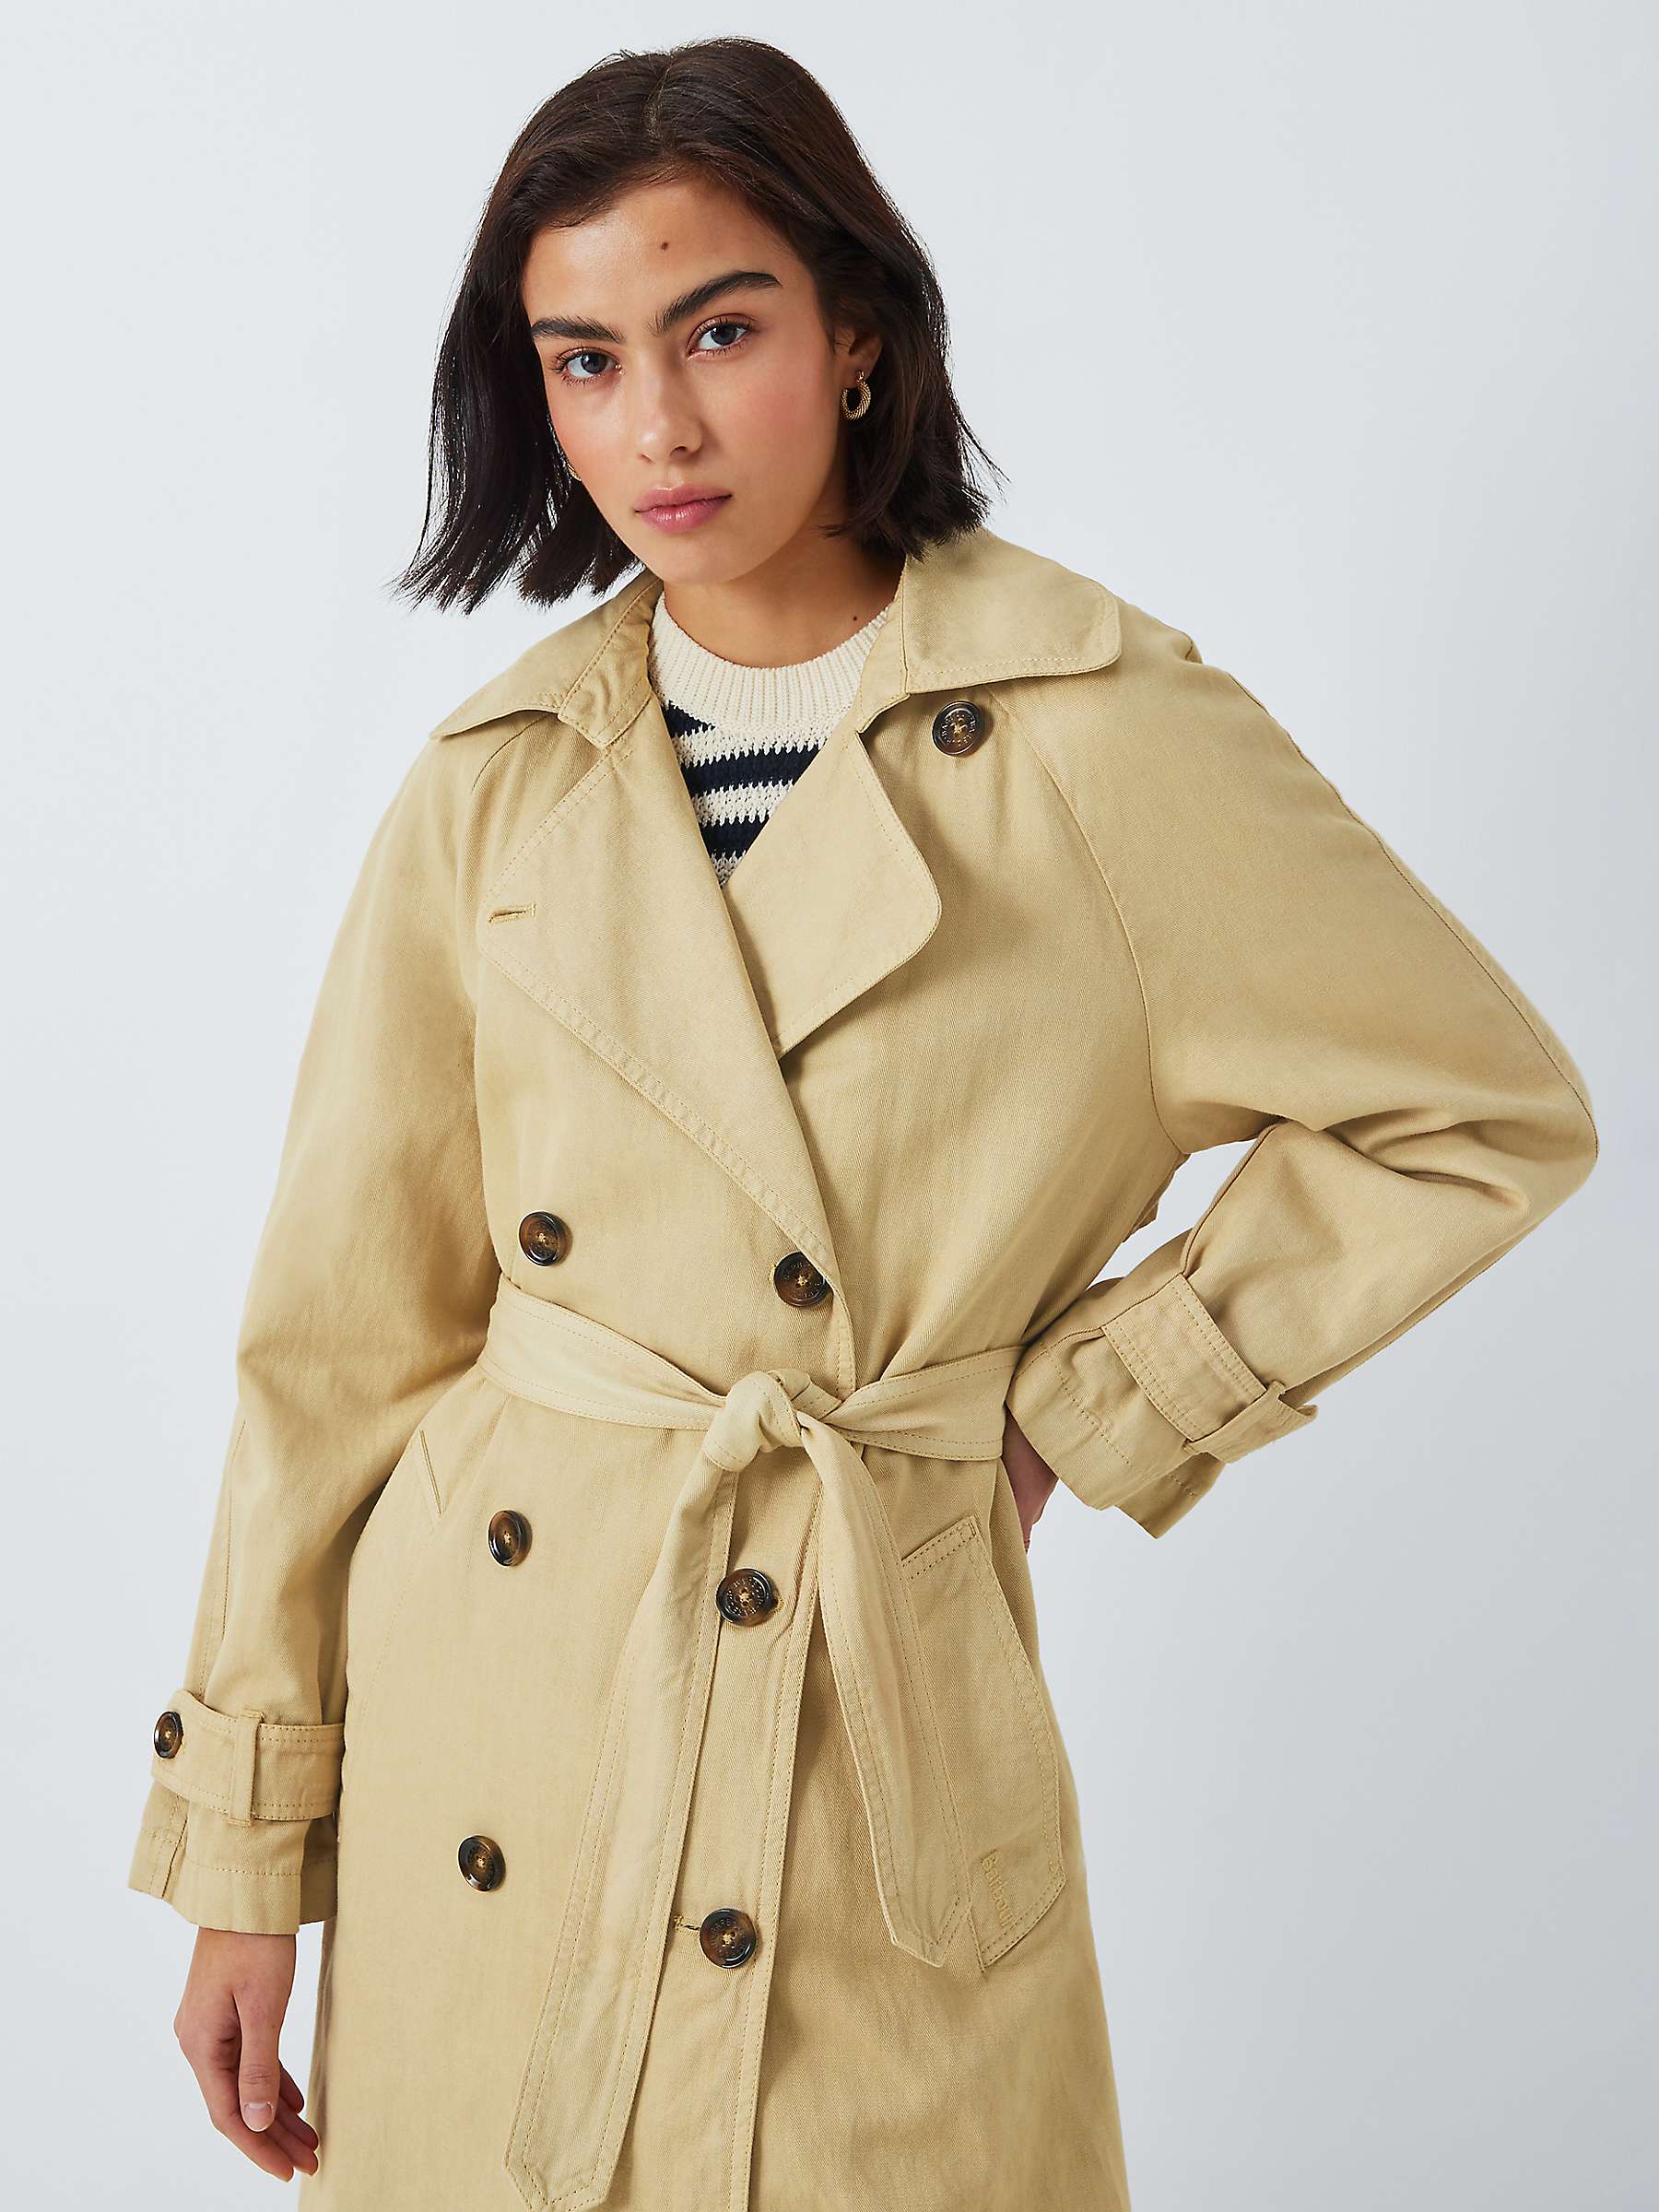 Buy Barbour Tomorrow's Archive Saoirse Linen Blend Trench Coat, Safari Online at johnlewis.com